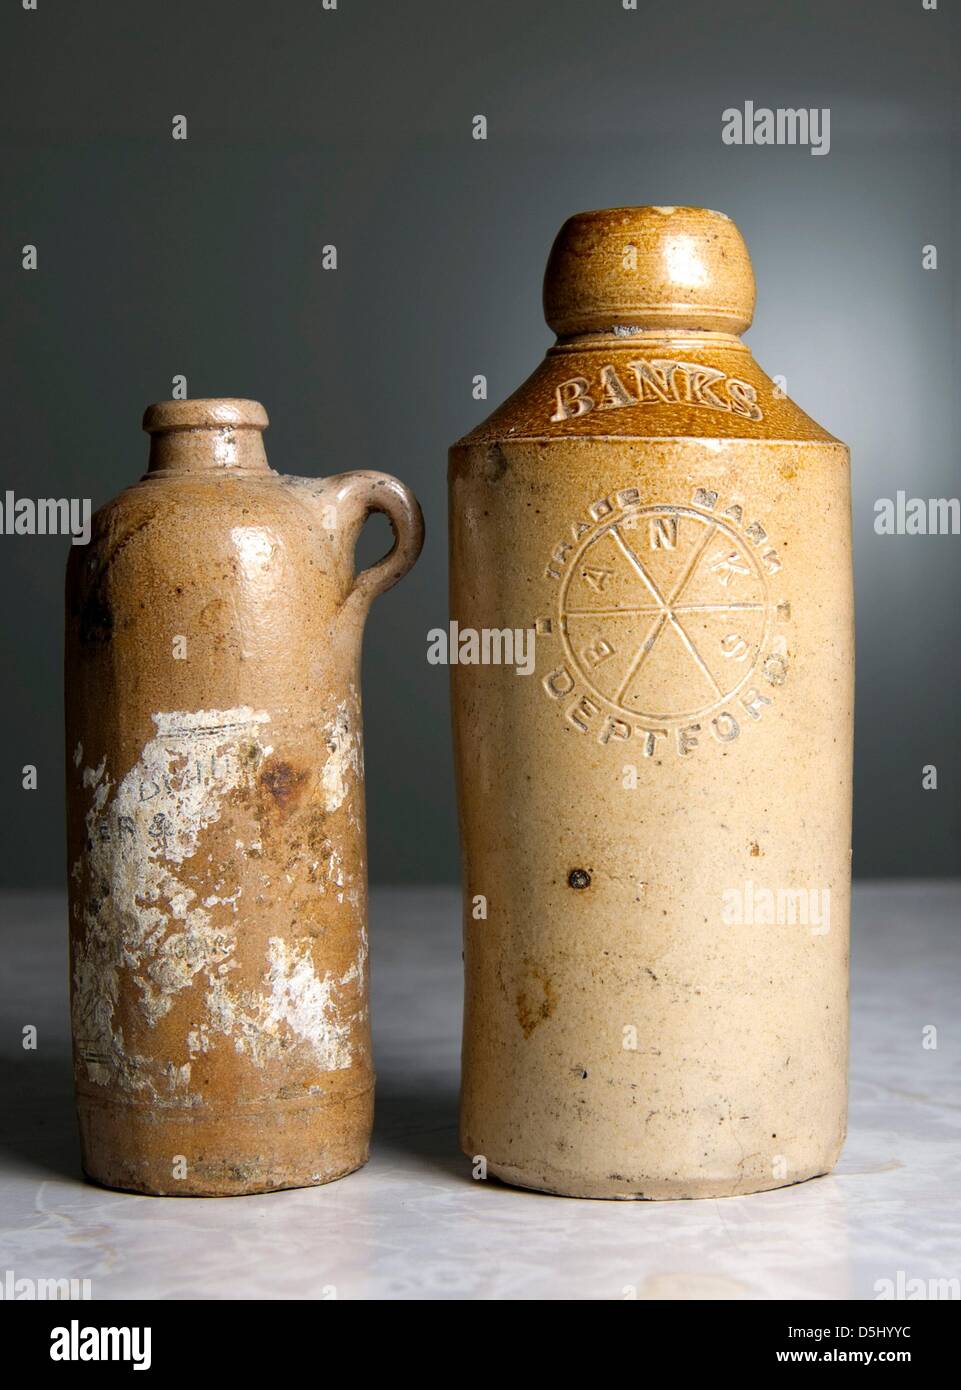 JOHANNEBSURG, SOUTH AFRICA: Newly excavated bottles on March 28, 2013, in Johannesburg, South Africa.  These bottles were found on the Rand Show grounds and date back almost 100 years. (Photo by Gallo Images / City Press / Herman Verwey) Stock Photo